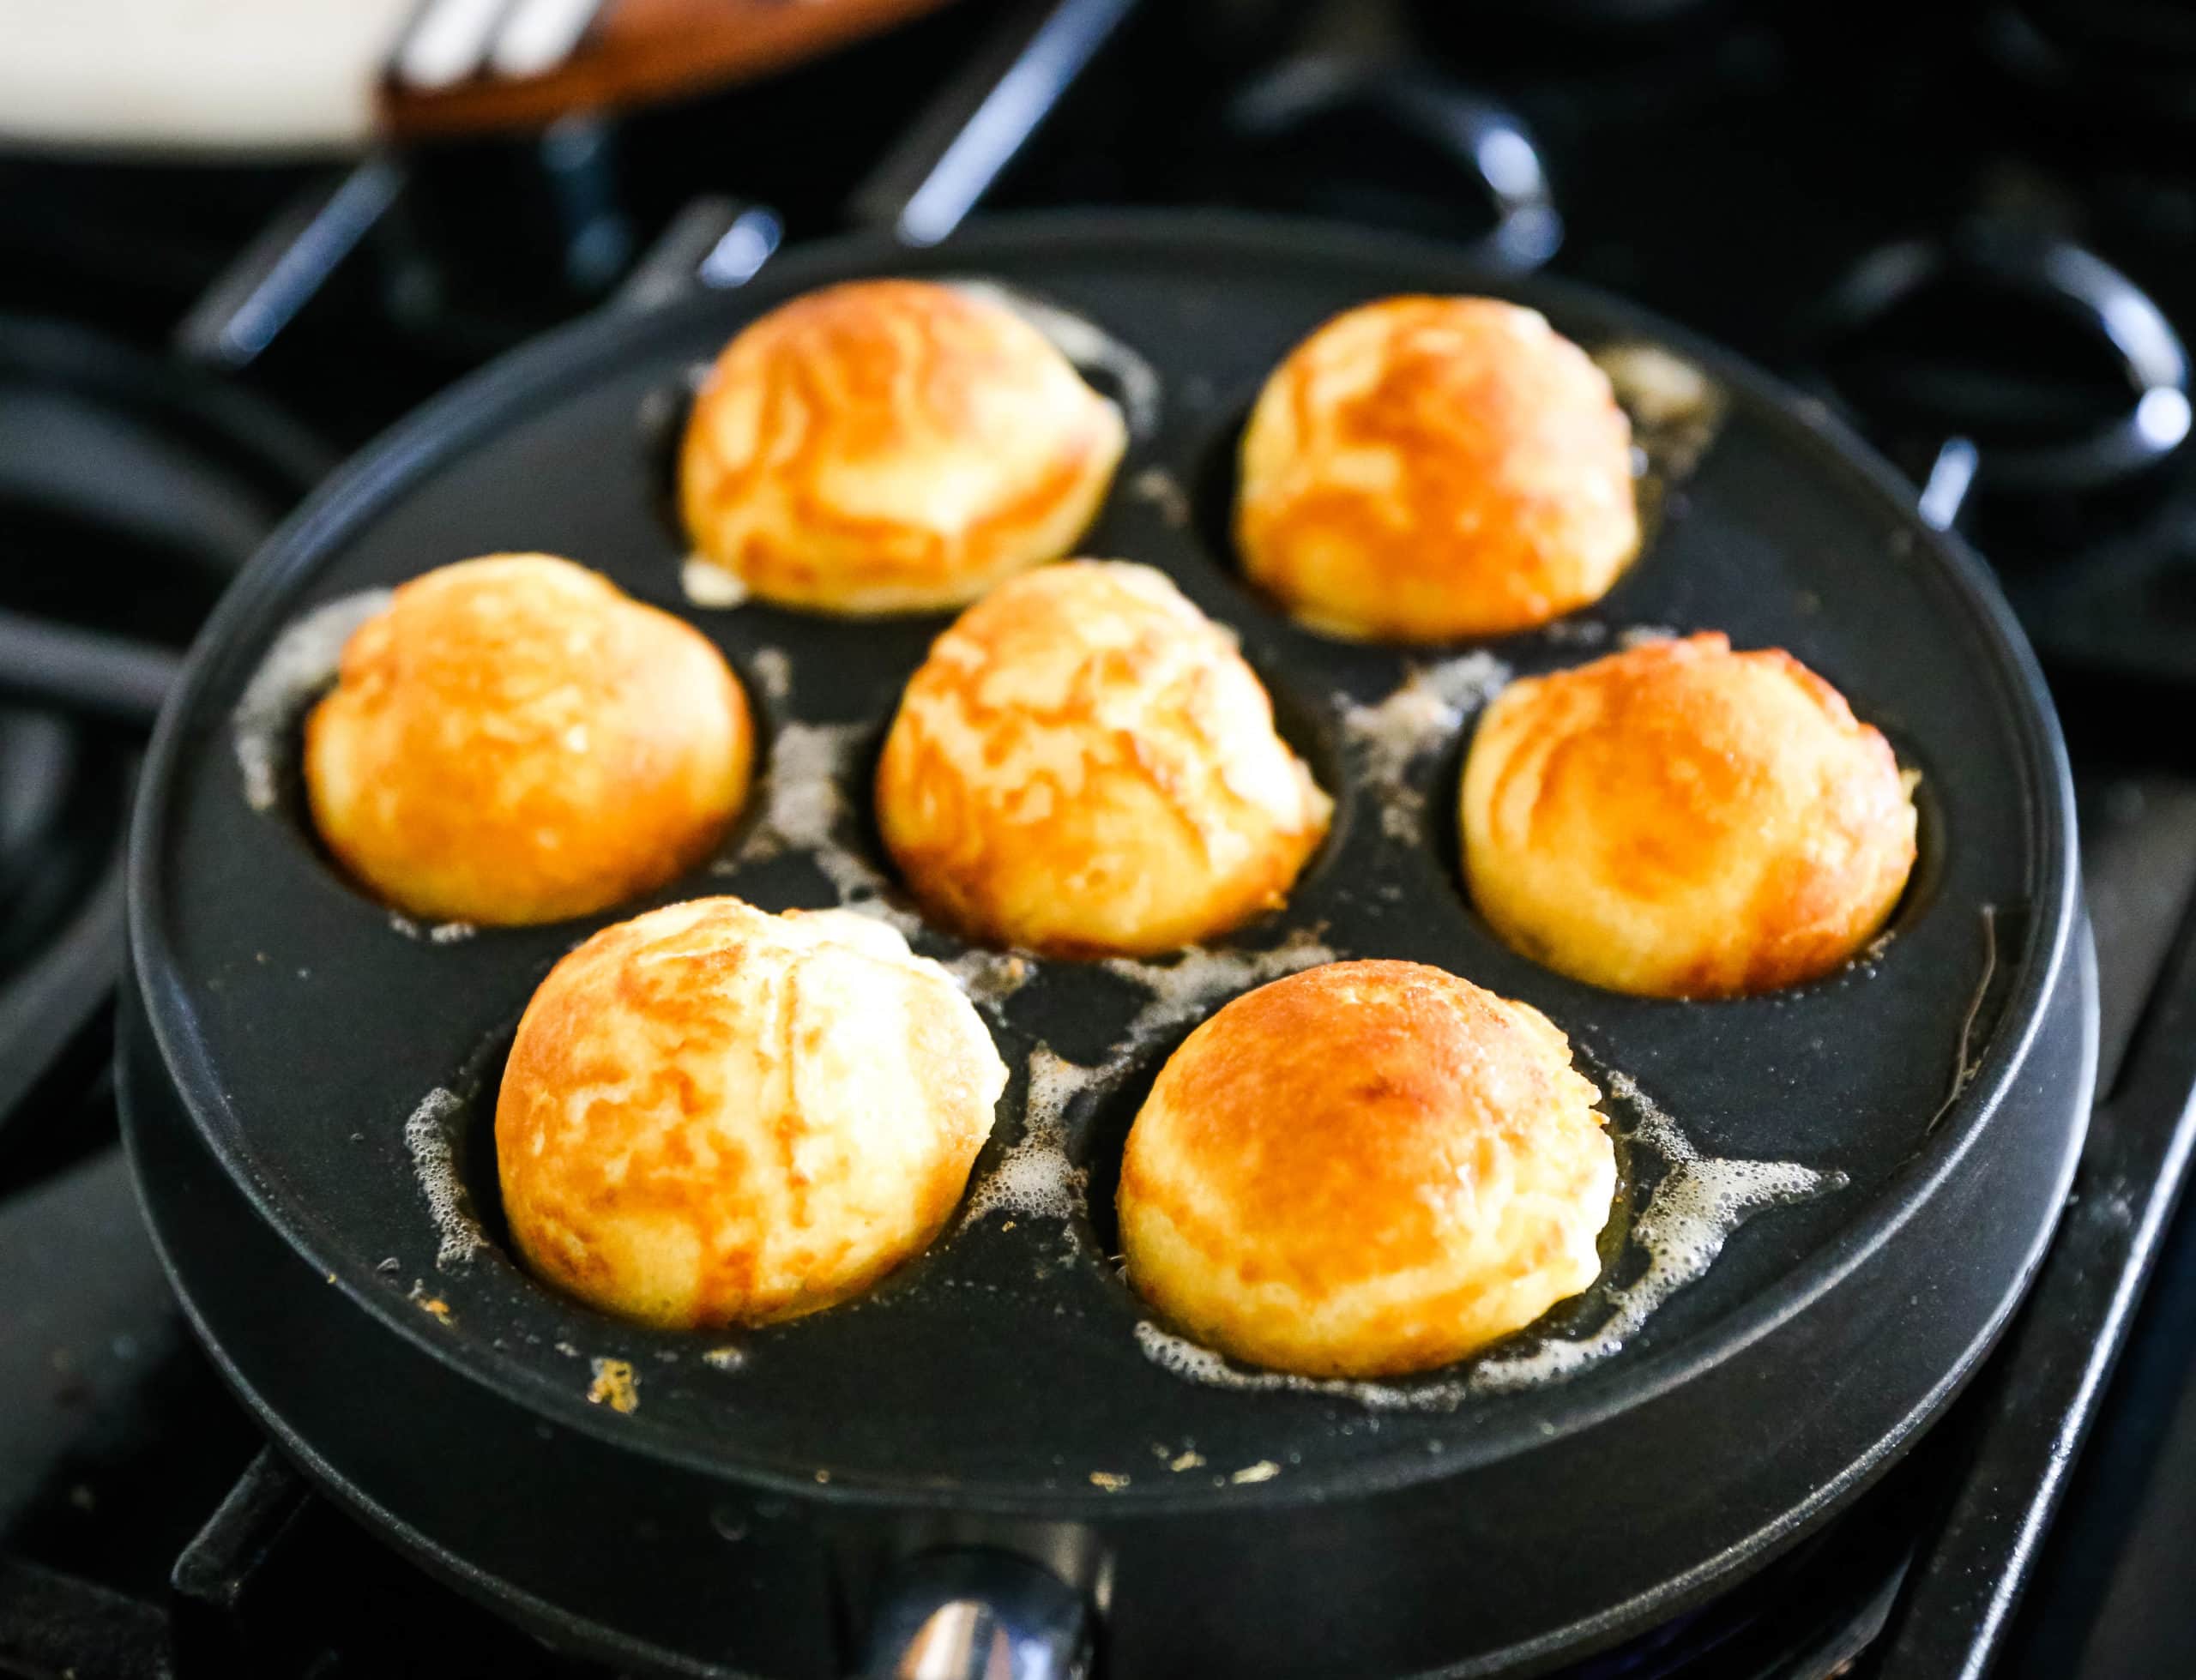 Aebleskiver Danish Pancakes a traditional Danish breakfast or dessert popular in Denmark is a circle pancake cooked in an aebleskiver pan and served with jam, powdered sugar, syrup, and fruit.  www.modernhoney.com #aebleskivers #danishpancakes #pancakes